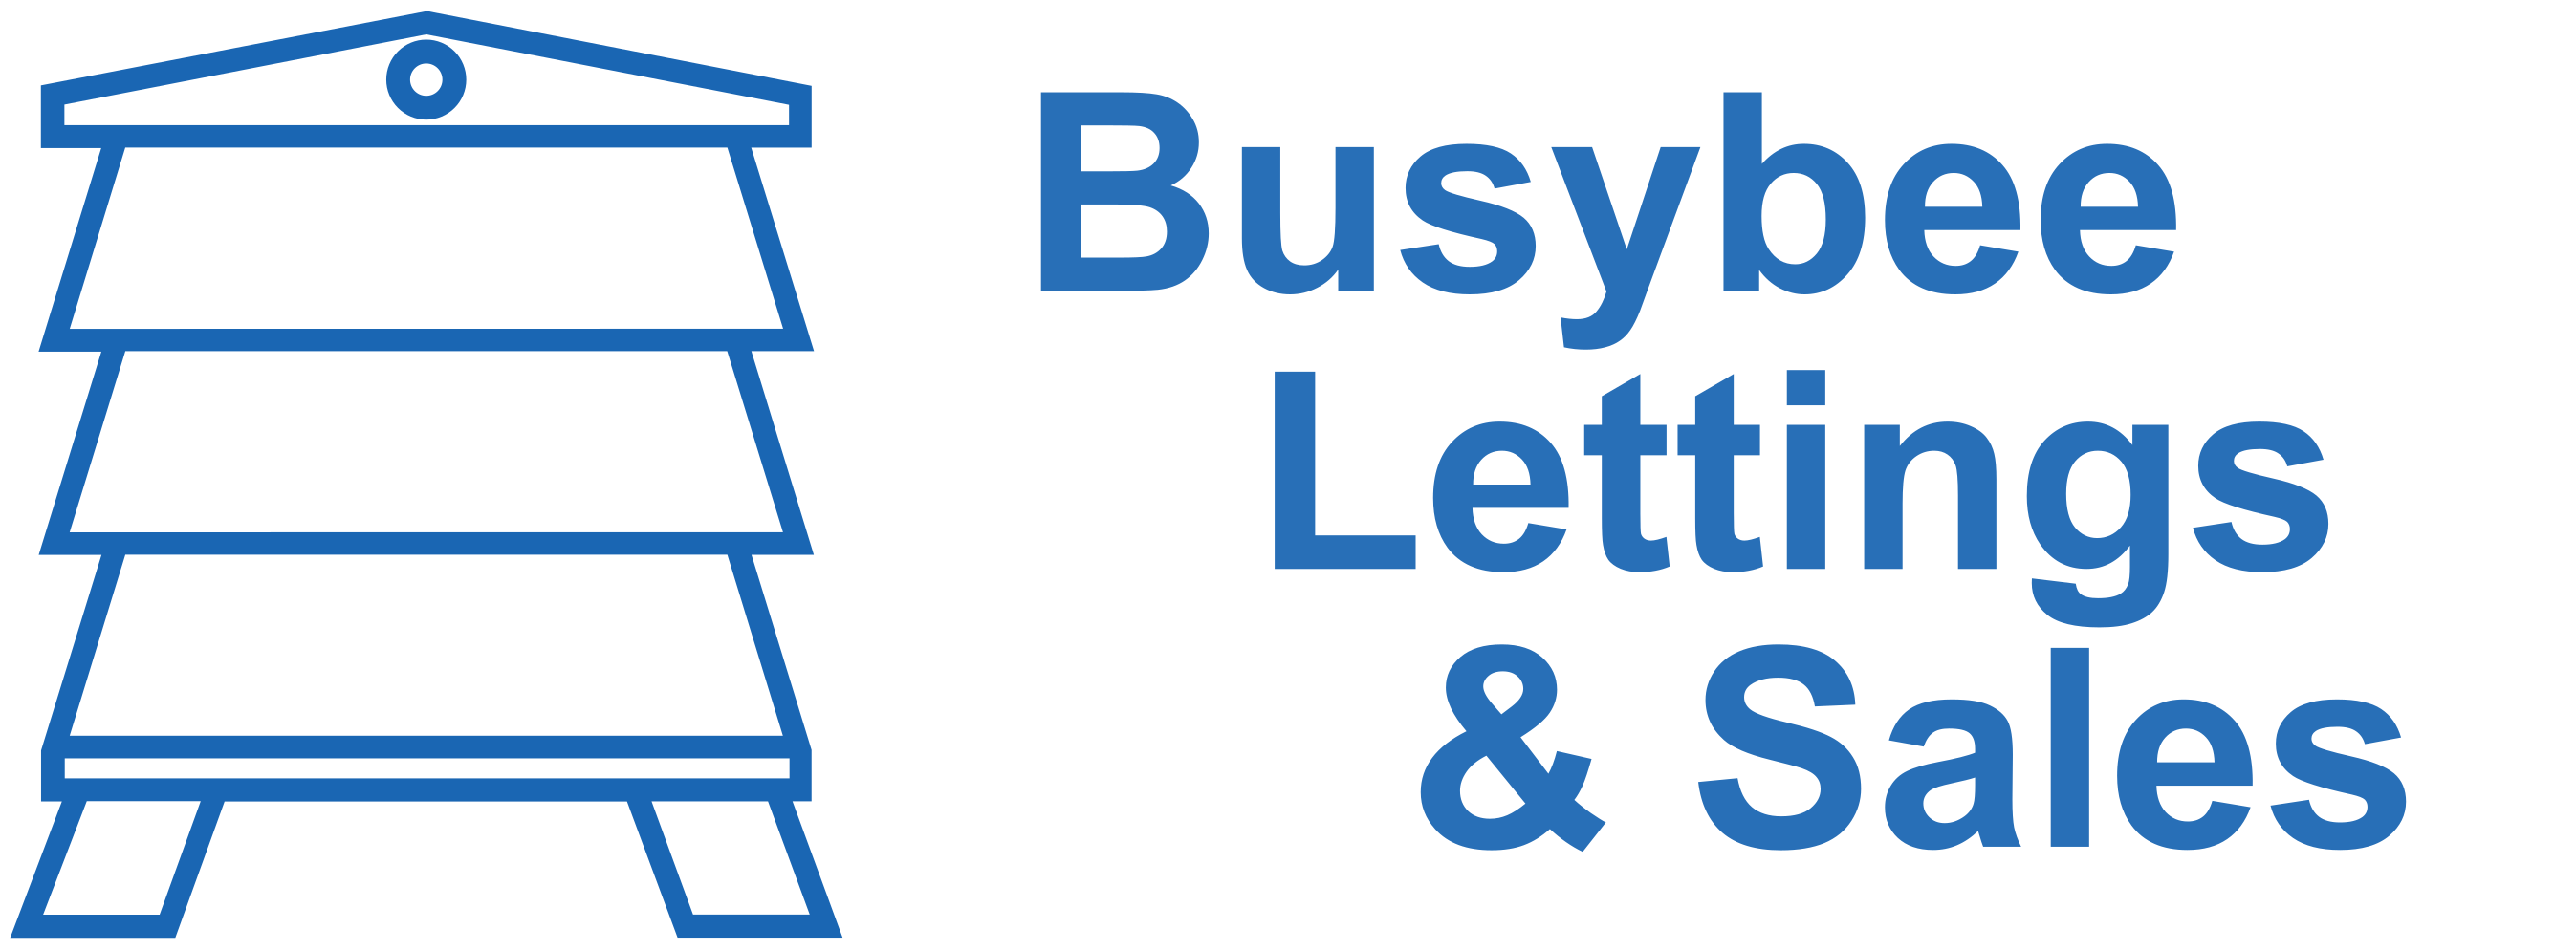 Busybee Lettings & Sales - Street : Letting agents in Yeovil Somerset